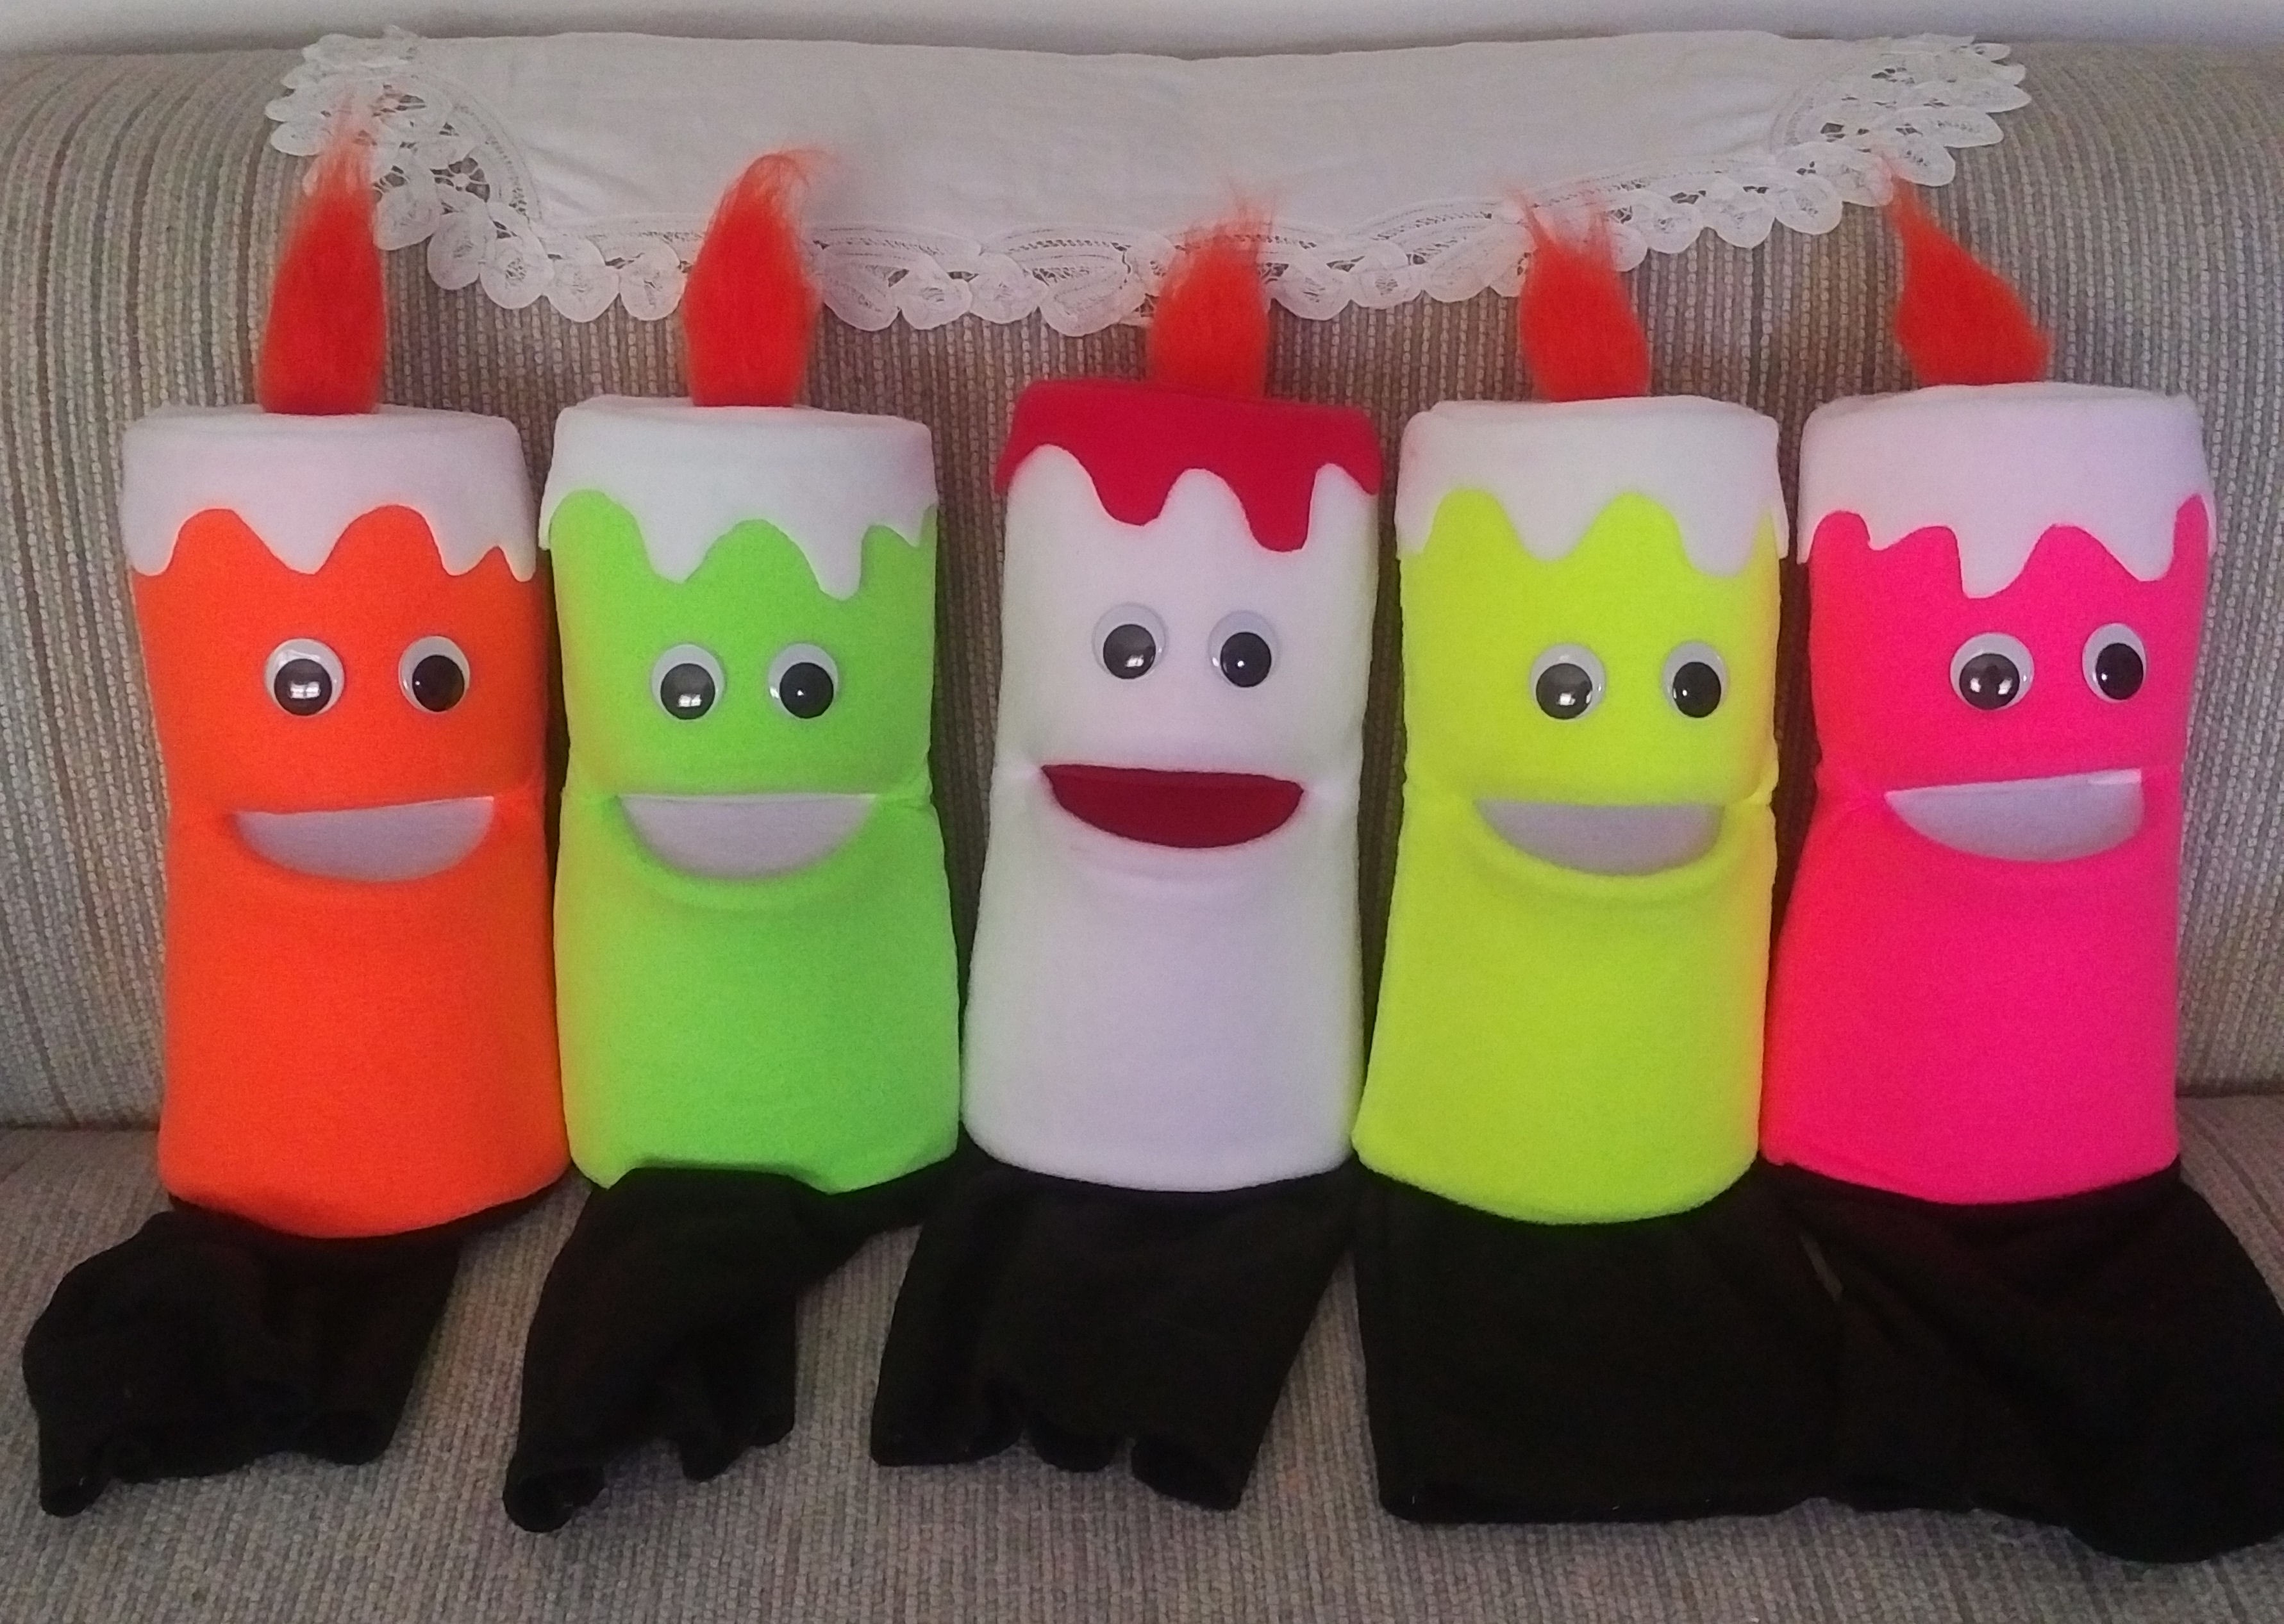 Blacklight Candle puppets